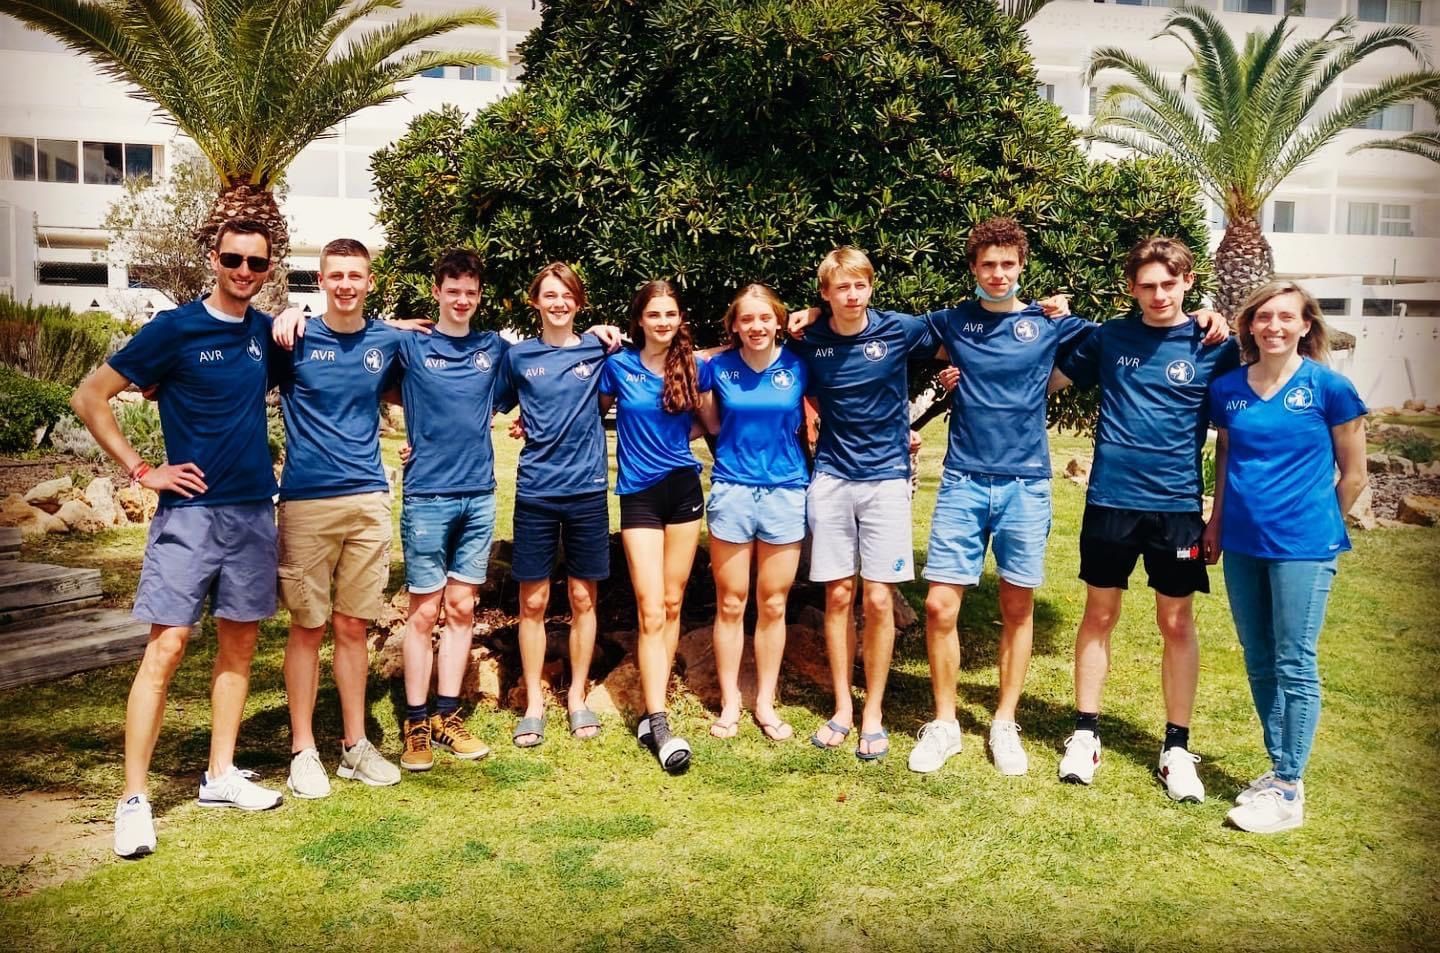 Evy Pieters (right) with a group of her athletes